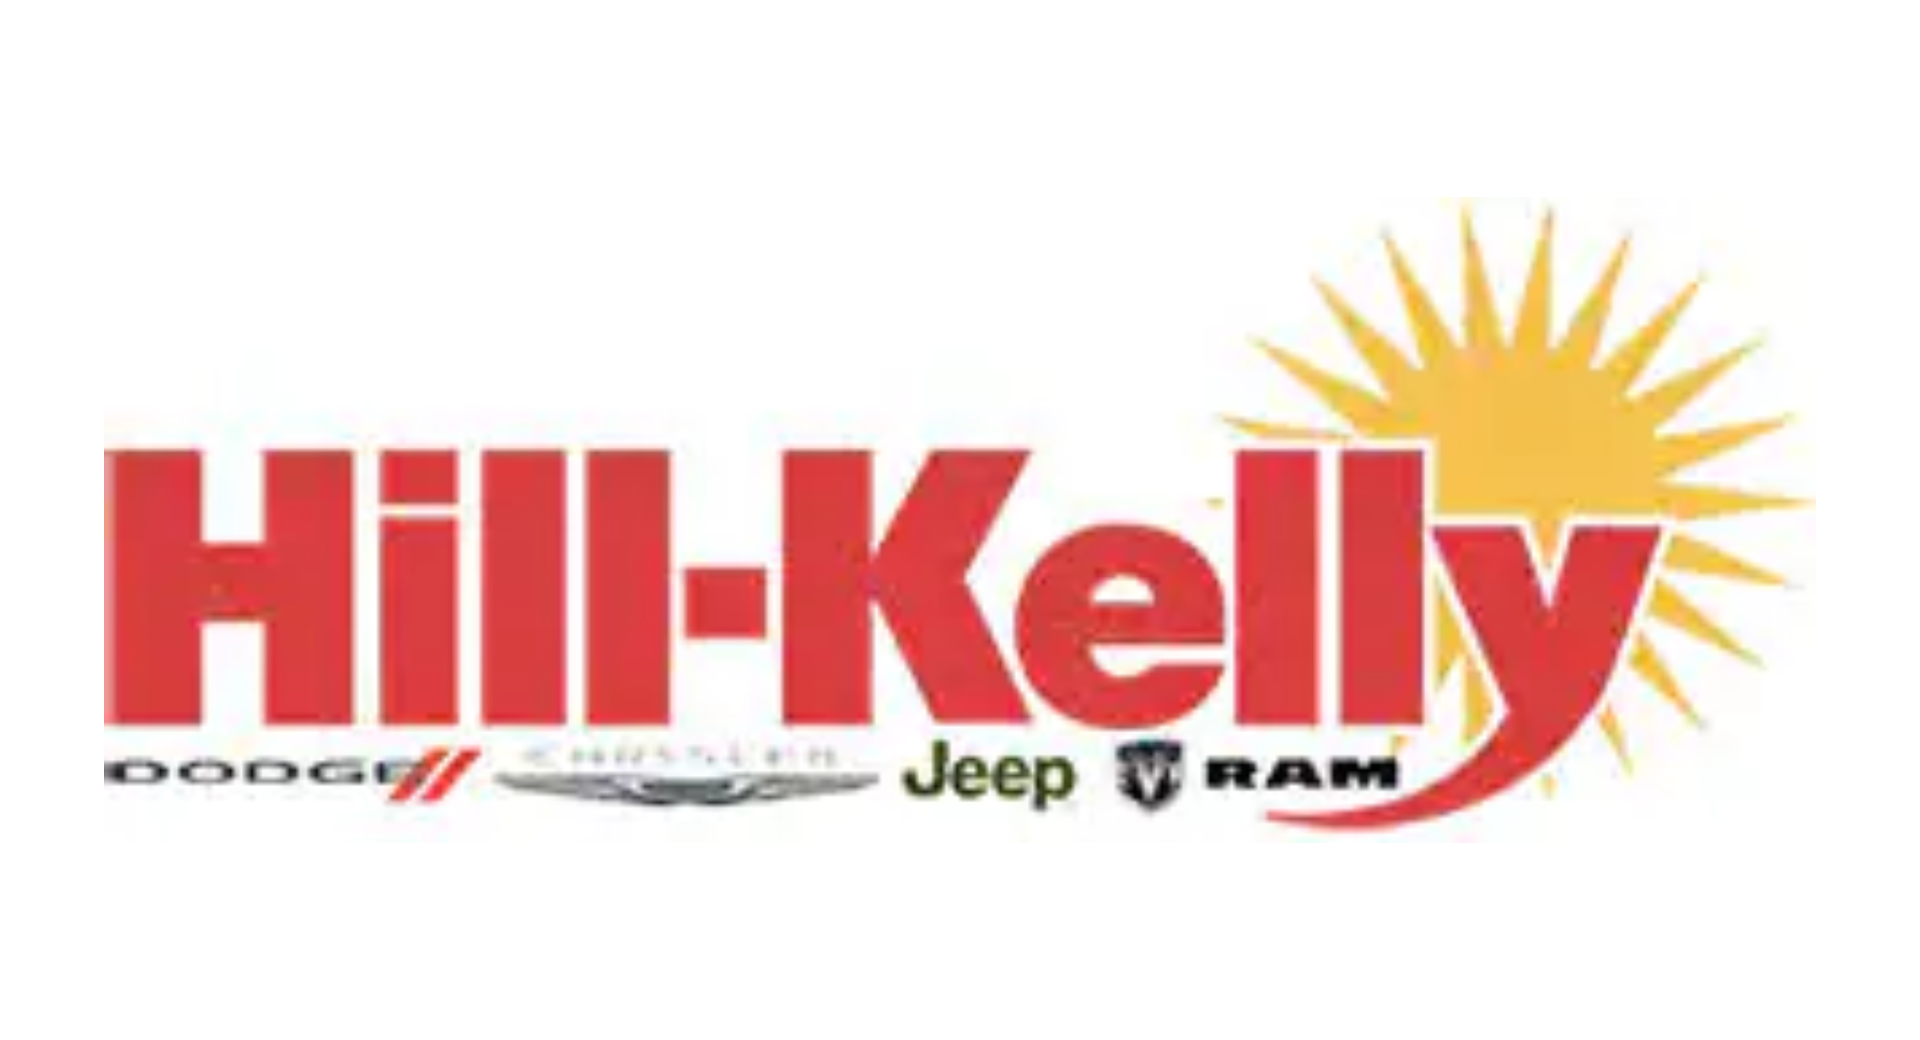 Hill-Kelly DCJR is a Certified Agriculture Dealership.